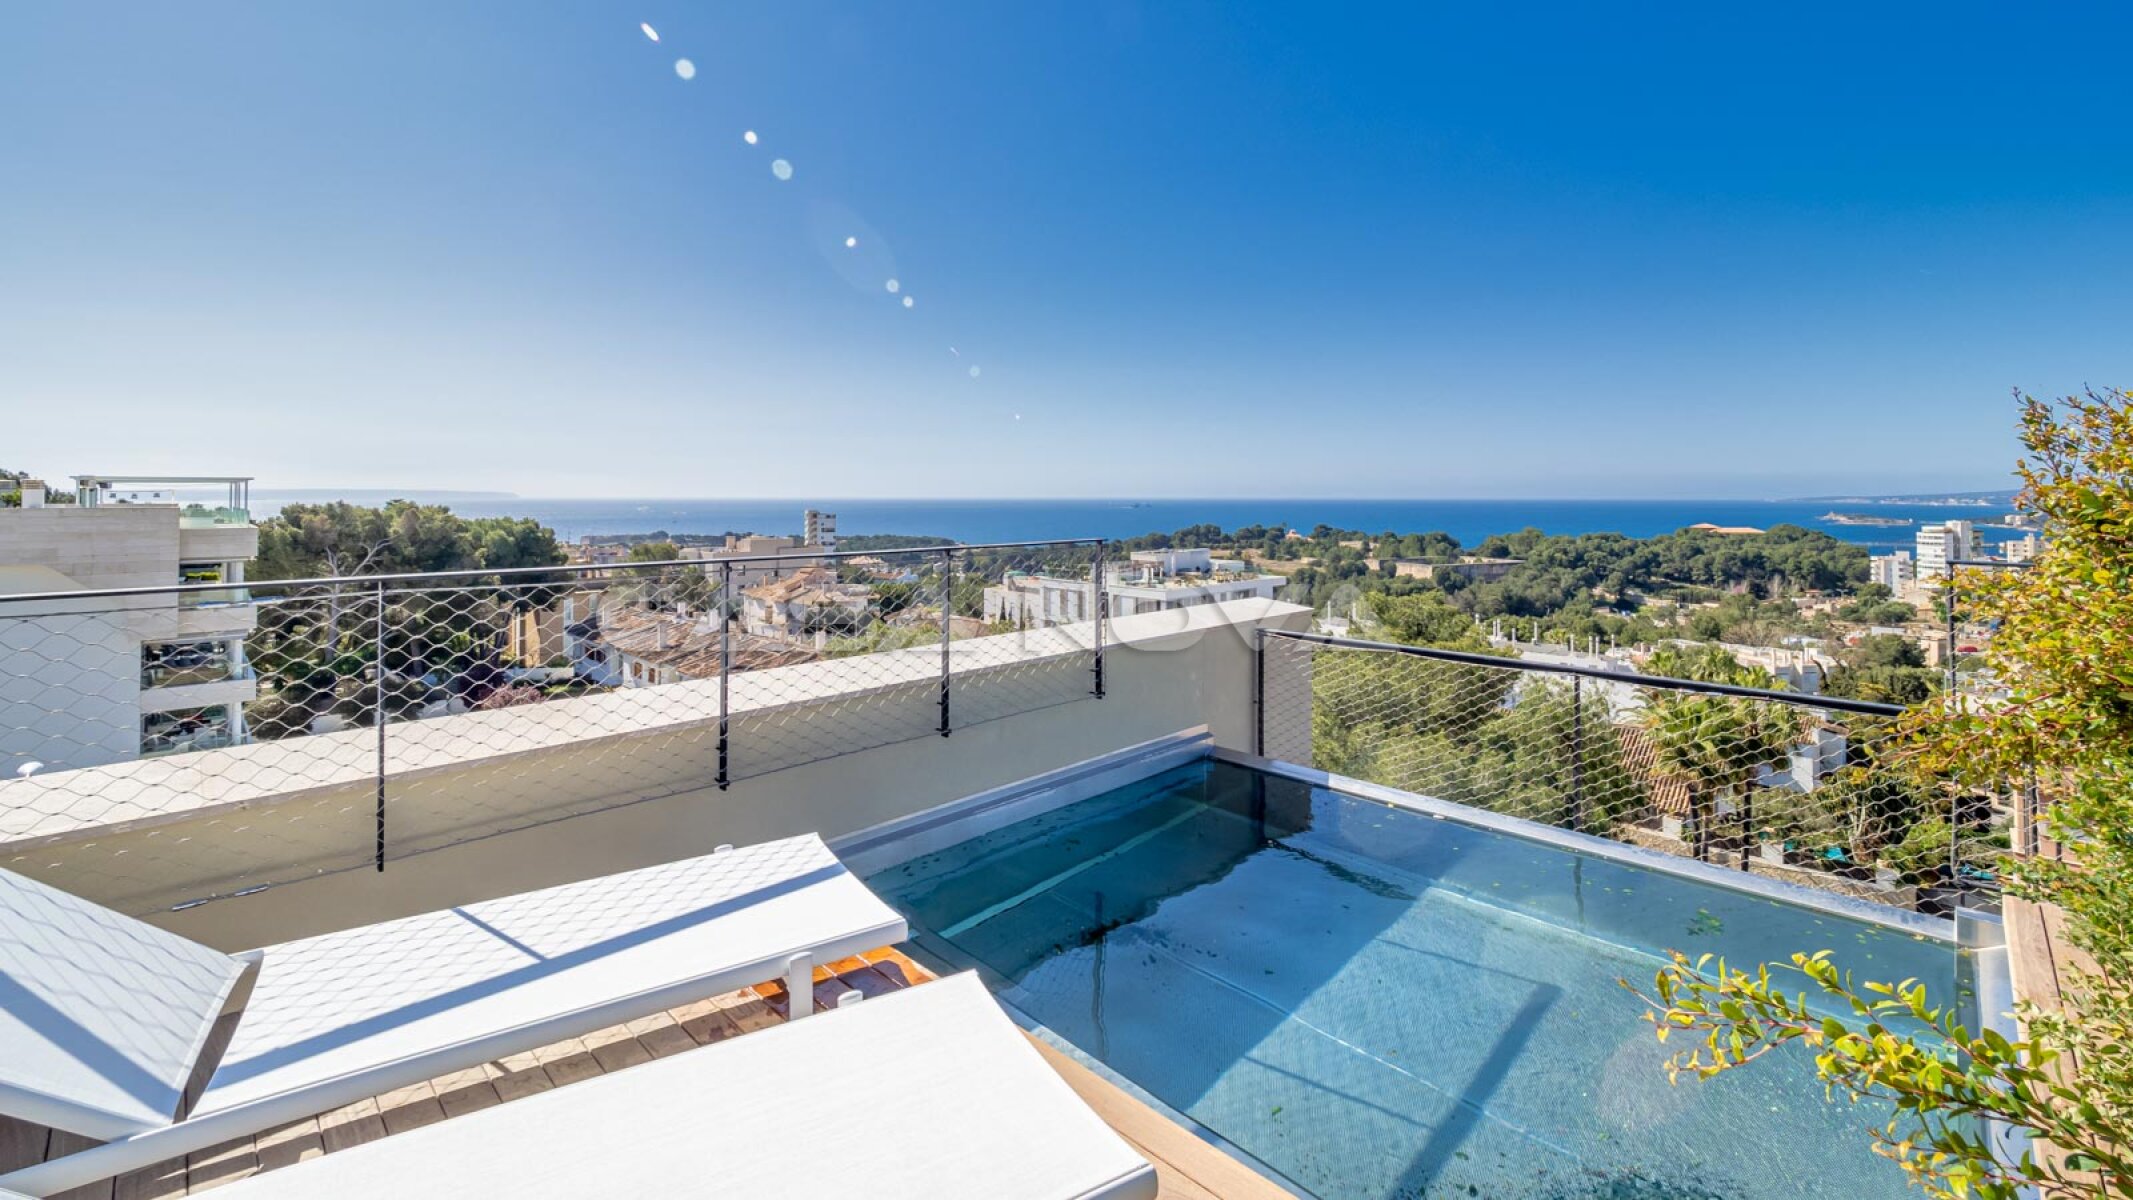 Duplex penthouse with idyllic roof terrace with pool